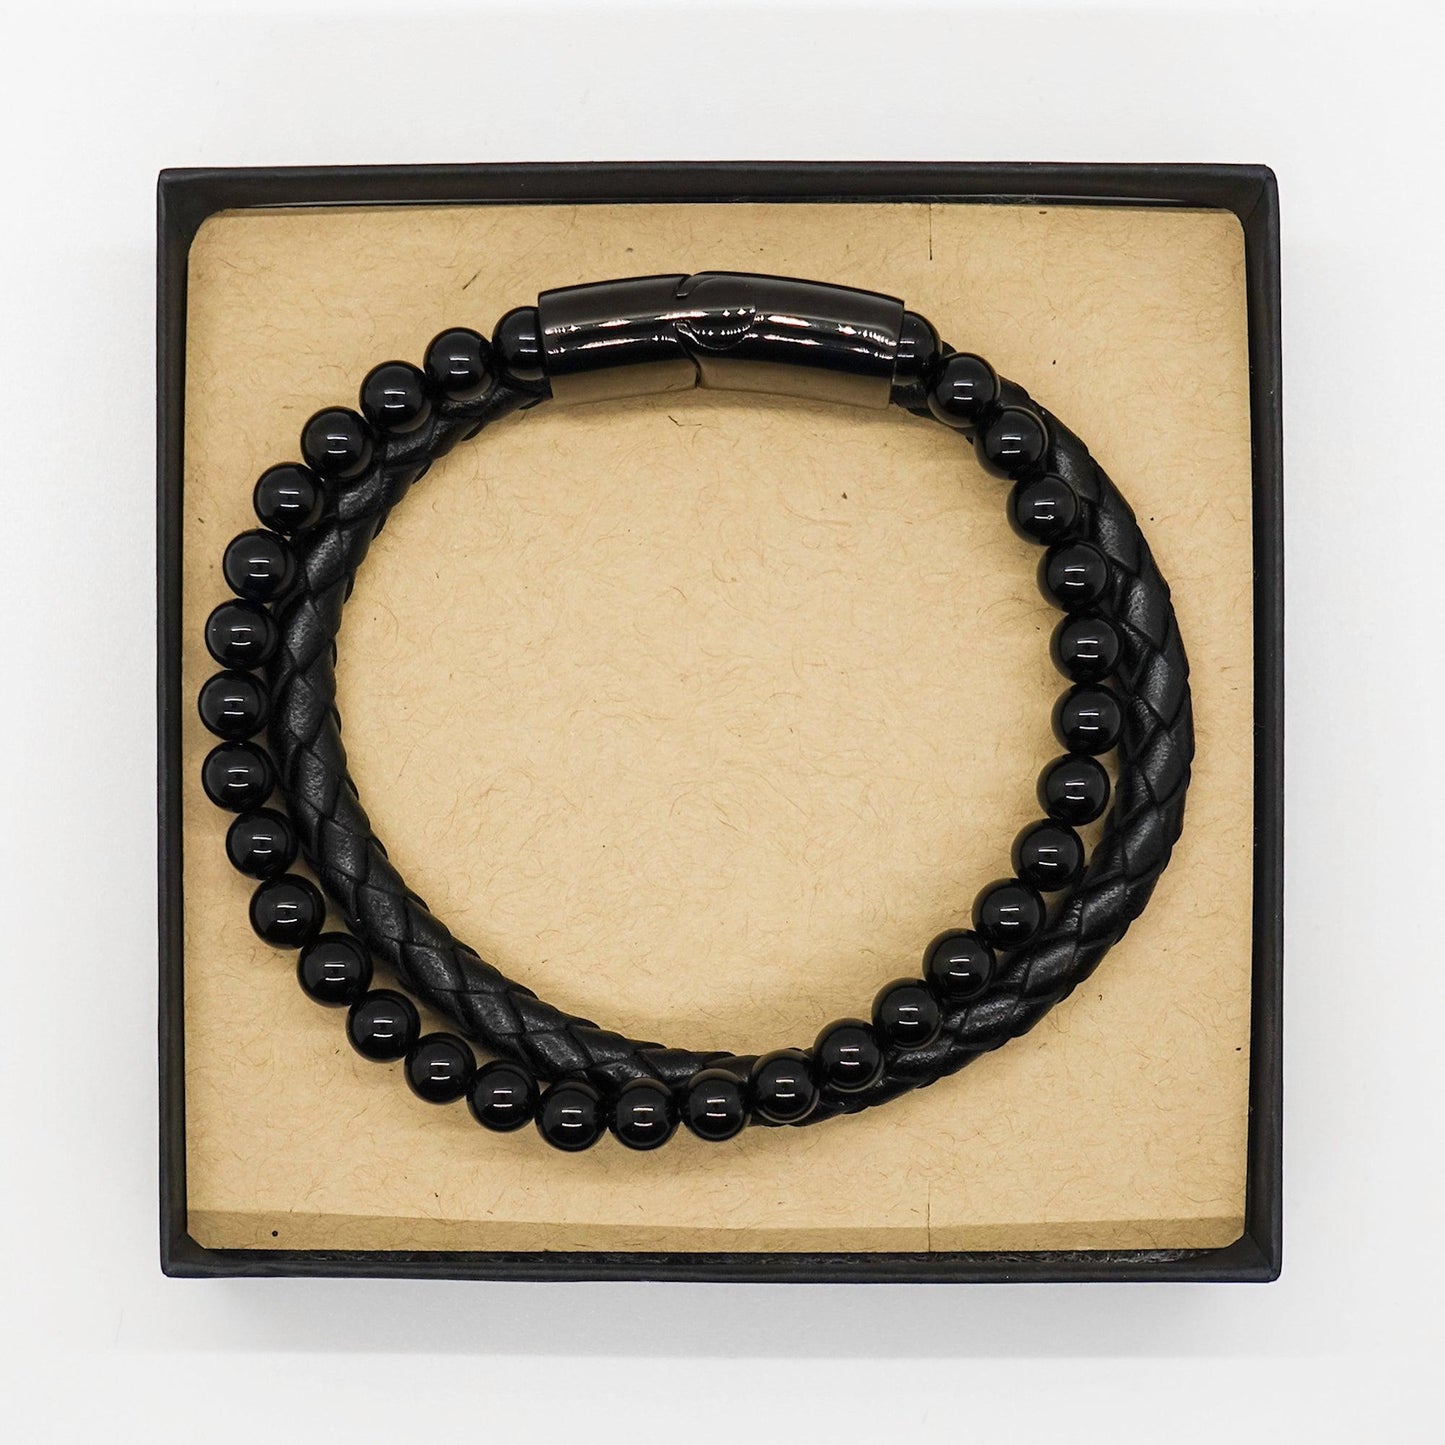 Janitor Black Braided Leather Stone Bracelet - Thanks for being who you are - Birthday Christmas Jewelry Gifts Coworkers Colleague Boss - Mallard Moon Gift Shop